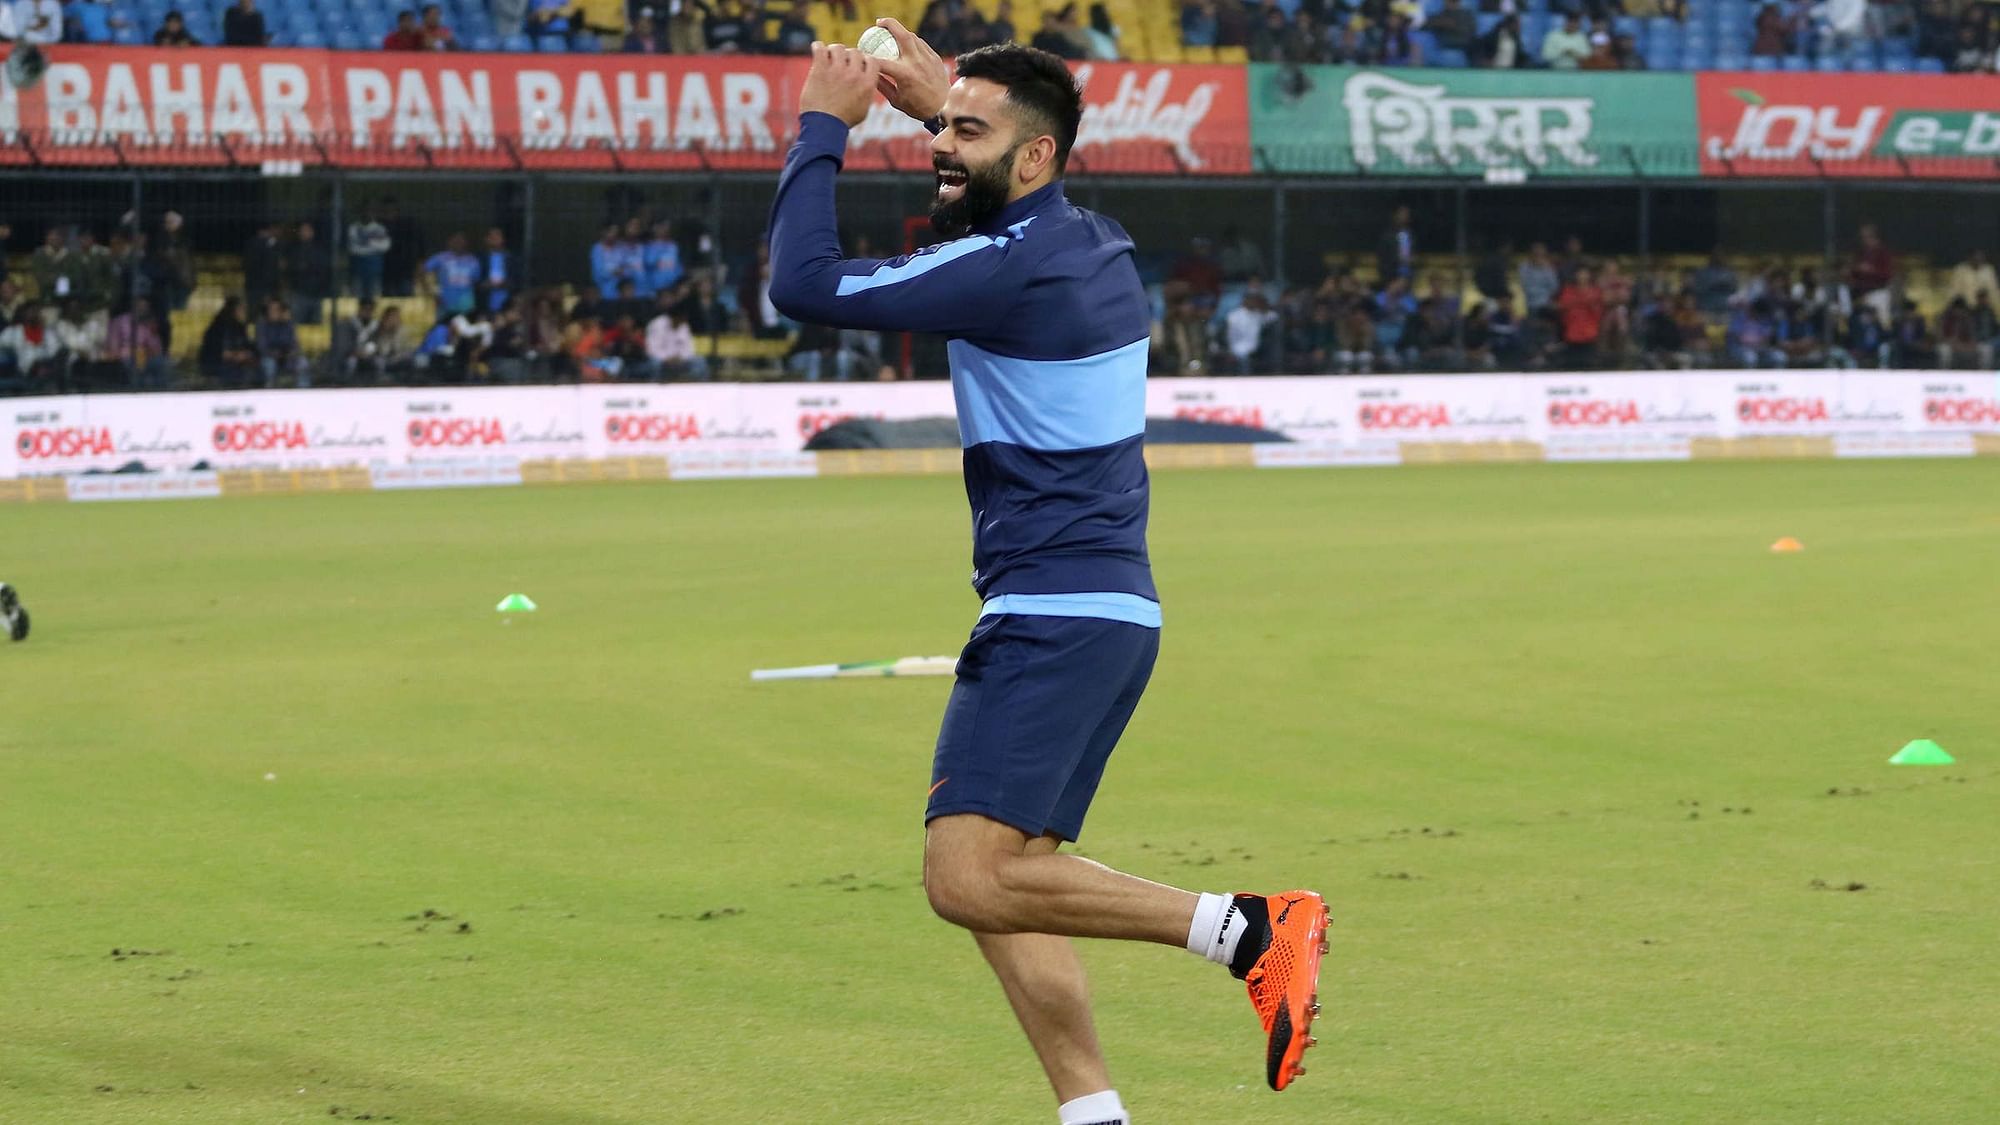 India skipper Virat Kohli was seen trying out Harbhajan Singh’s bowling action ahead of the 2nd T20I between India and Sri Lanka.